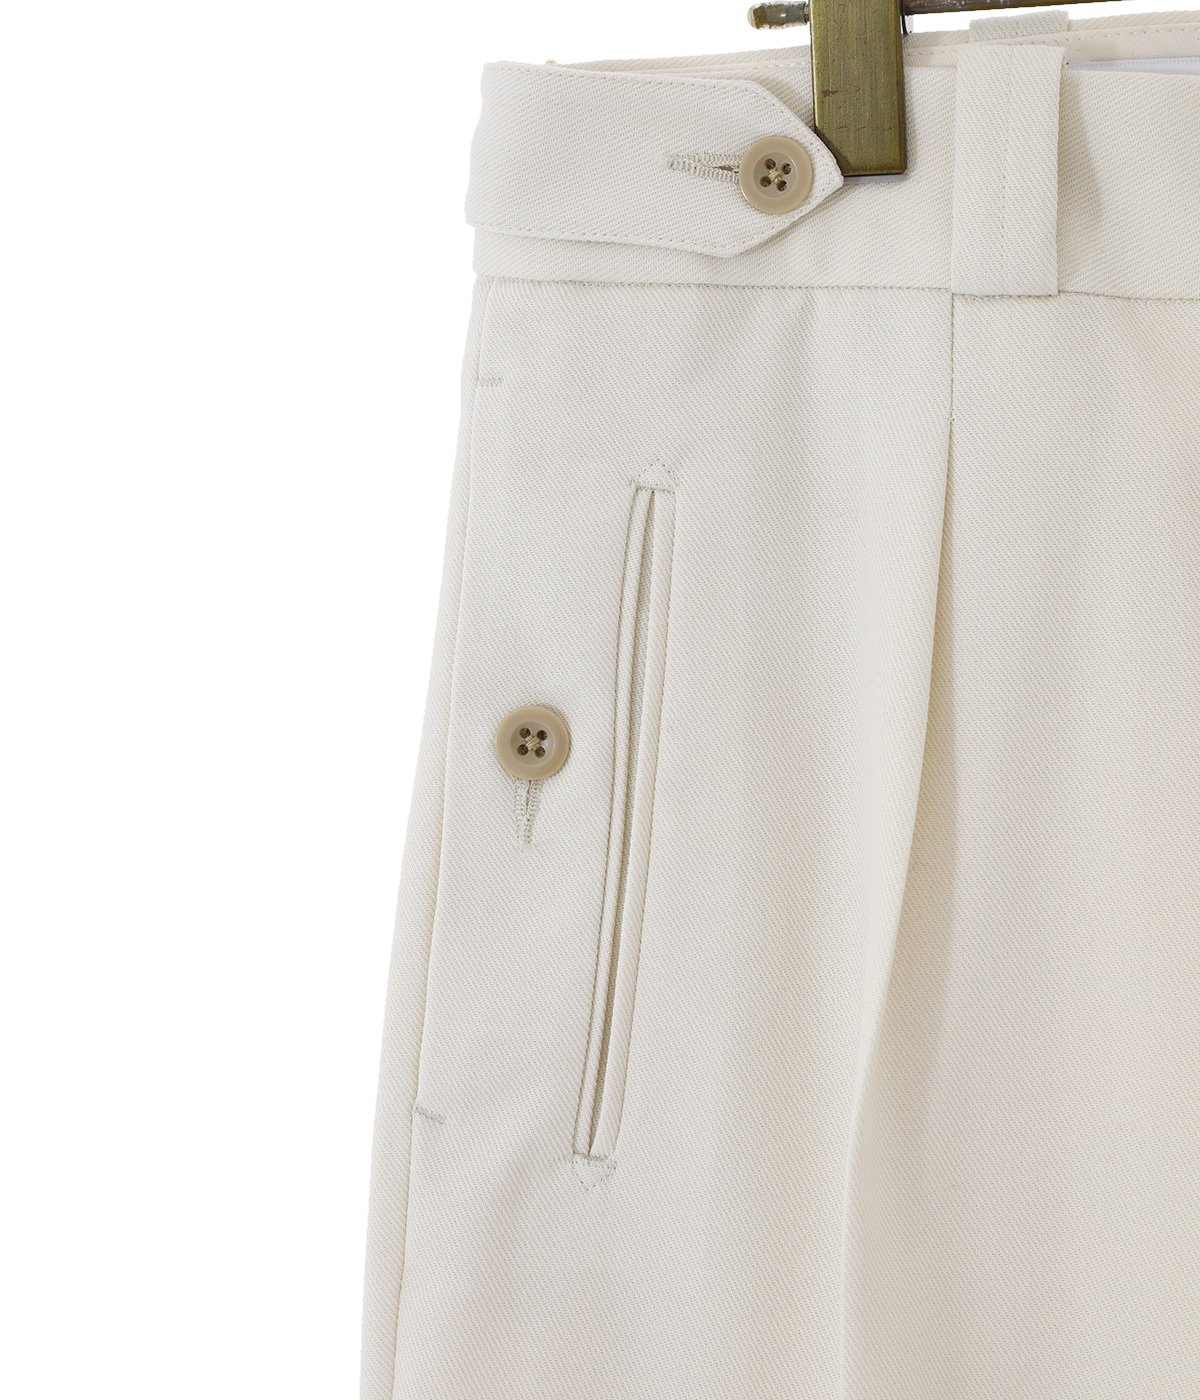 CHARLES -FRENCH ARMY ADJUSTER PANTS HARD TWIST TWILL | Tangent 